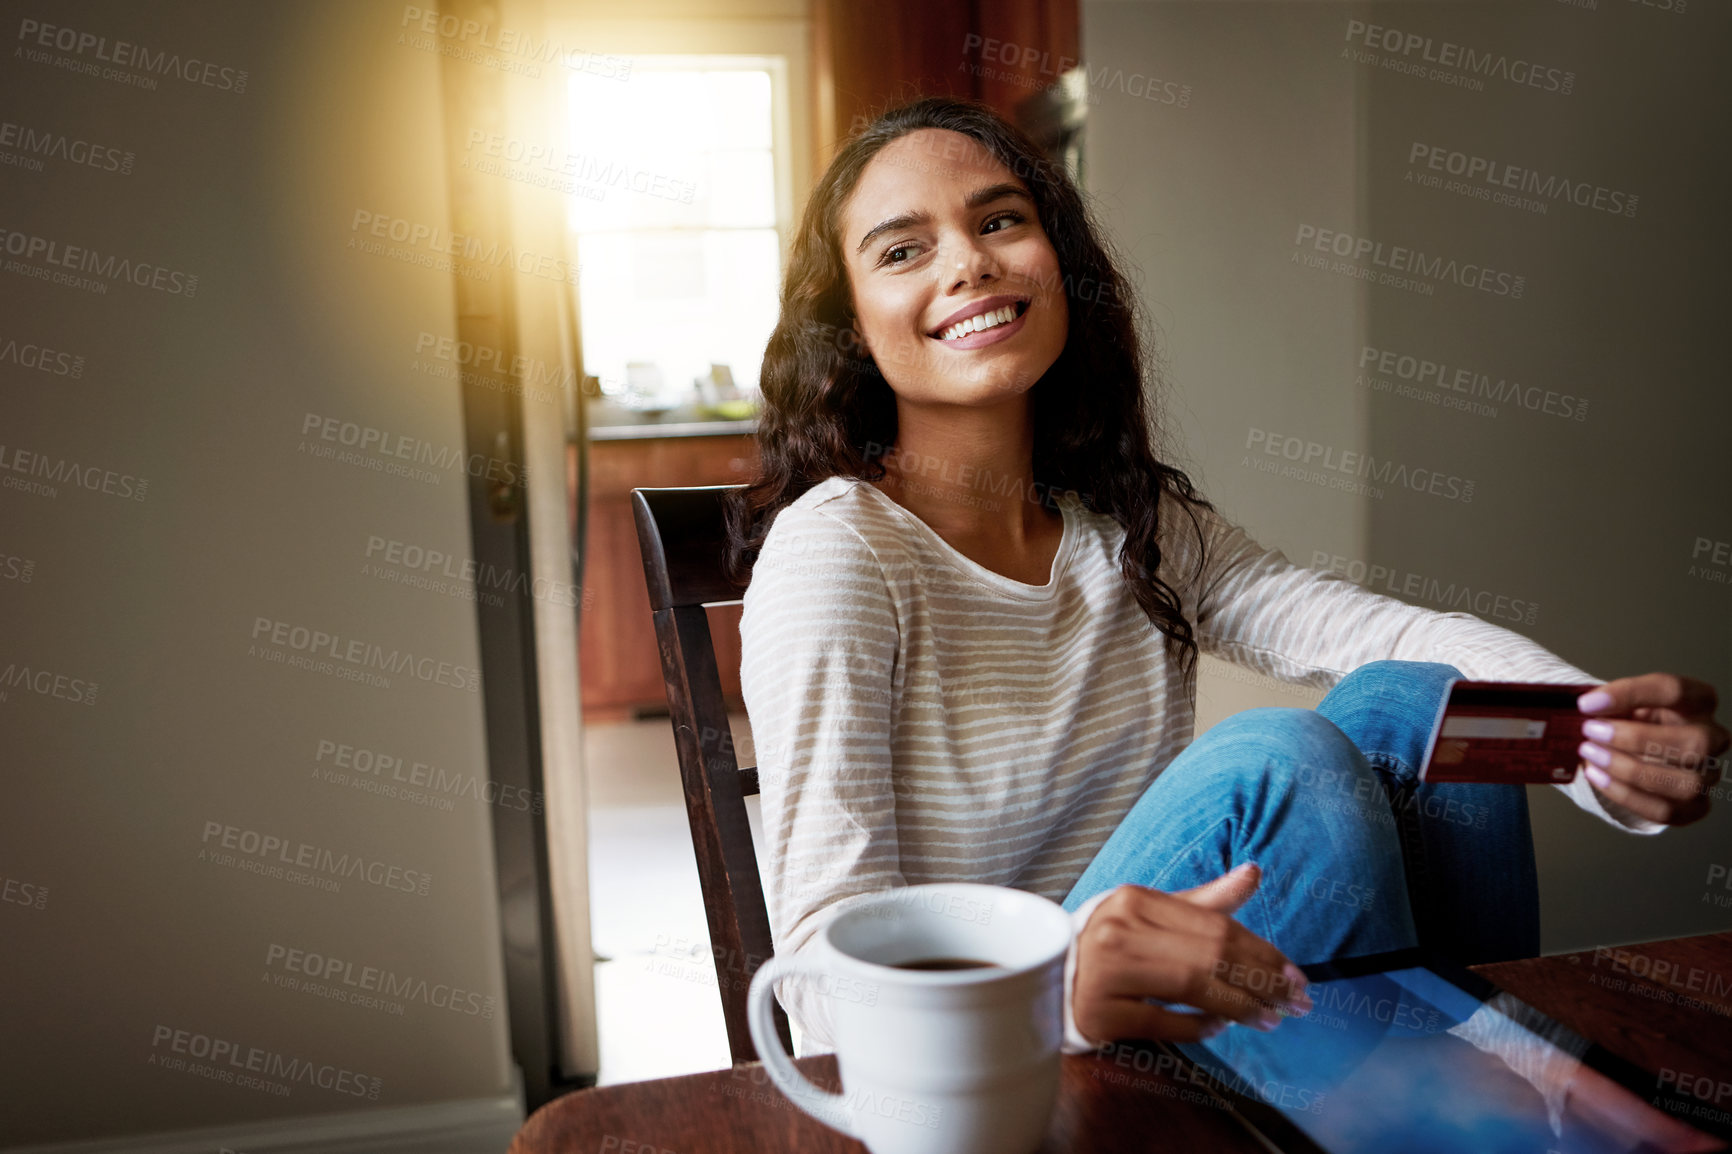 Buy stock photo Shot of a young woman drinking coffee and shopping online with her digital tablet at home